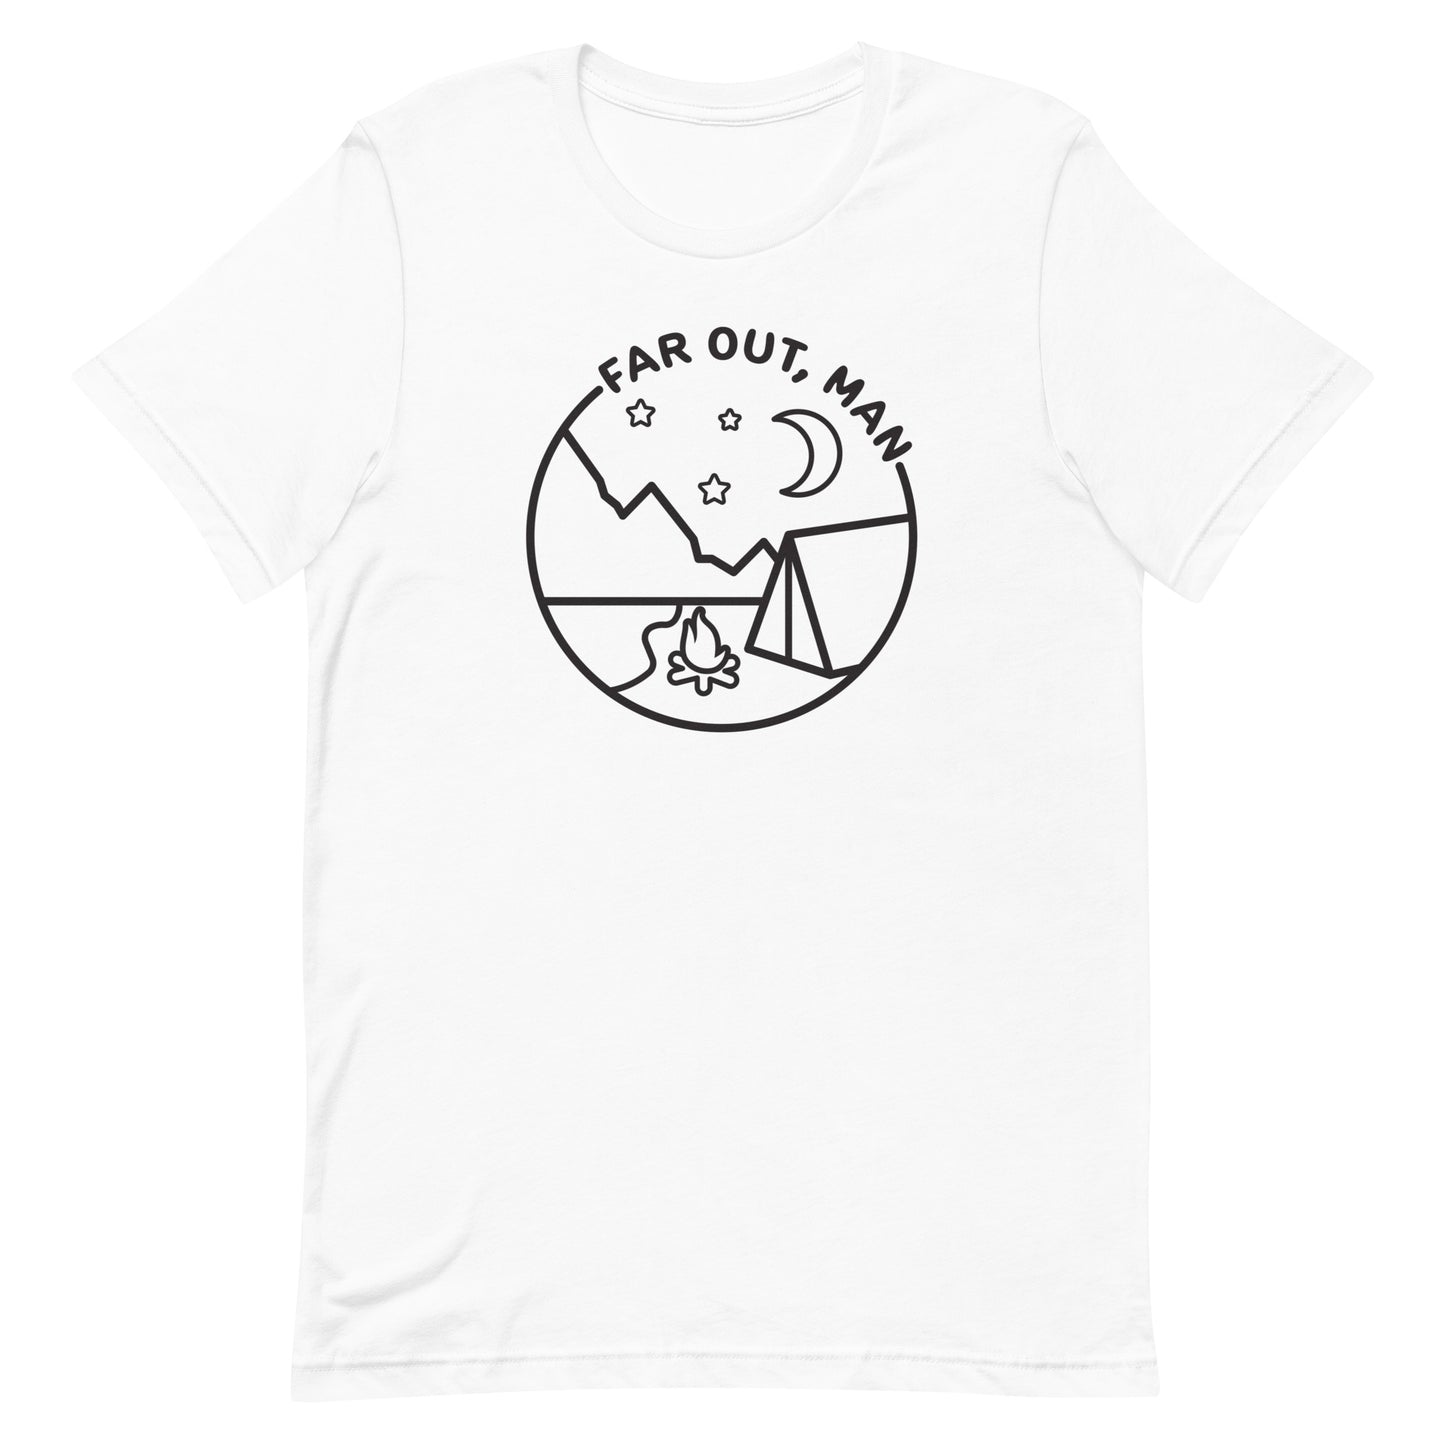 A white t-shirt with a black lineart graphic of a tent and campfire under a night sky. Text in an arc above the image reads "Far out, man".